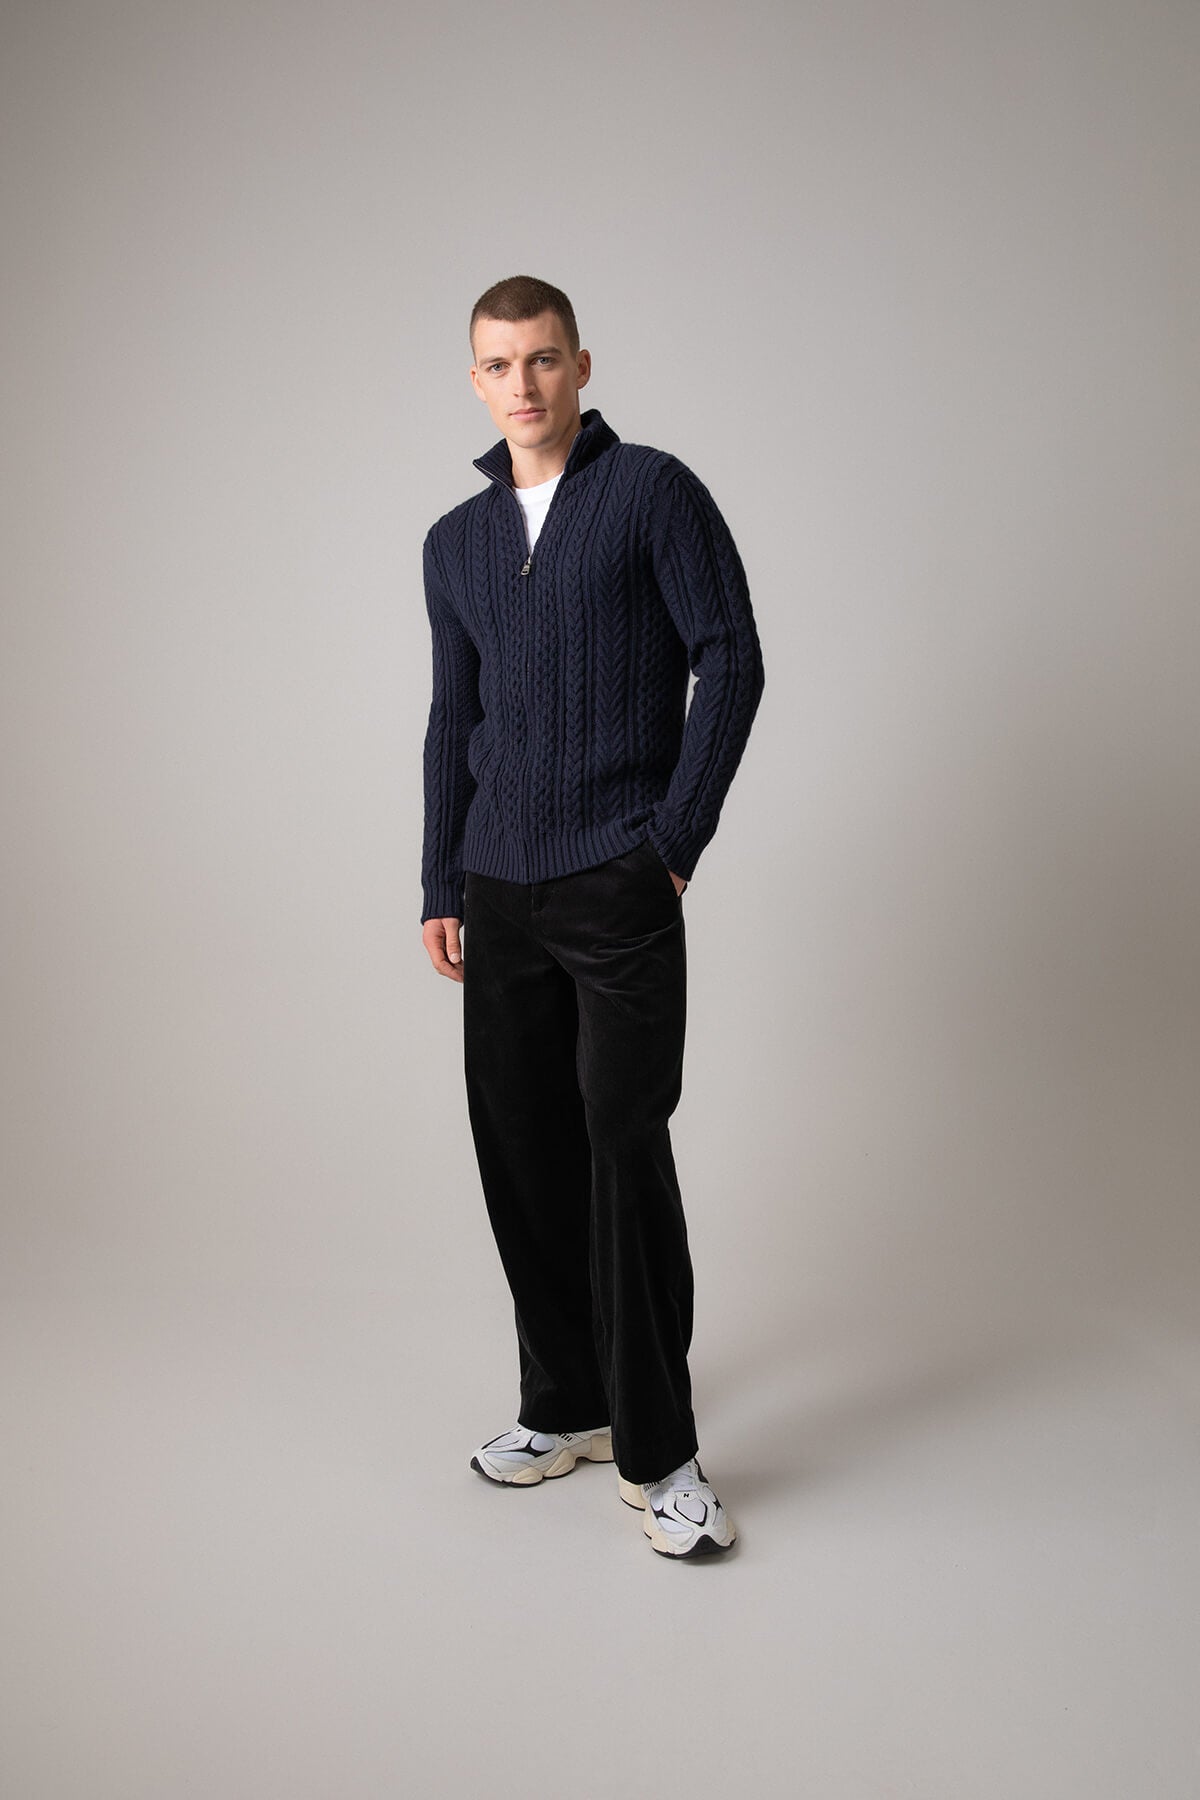 Johnstons of Elgin’s Men's Aran Cable Cashmere Zip Cardigan in Dark Navy on model wearing black trousers on a grey background KAI05119Q23706